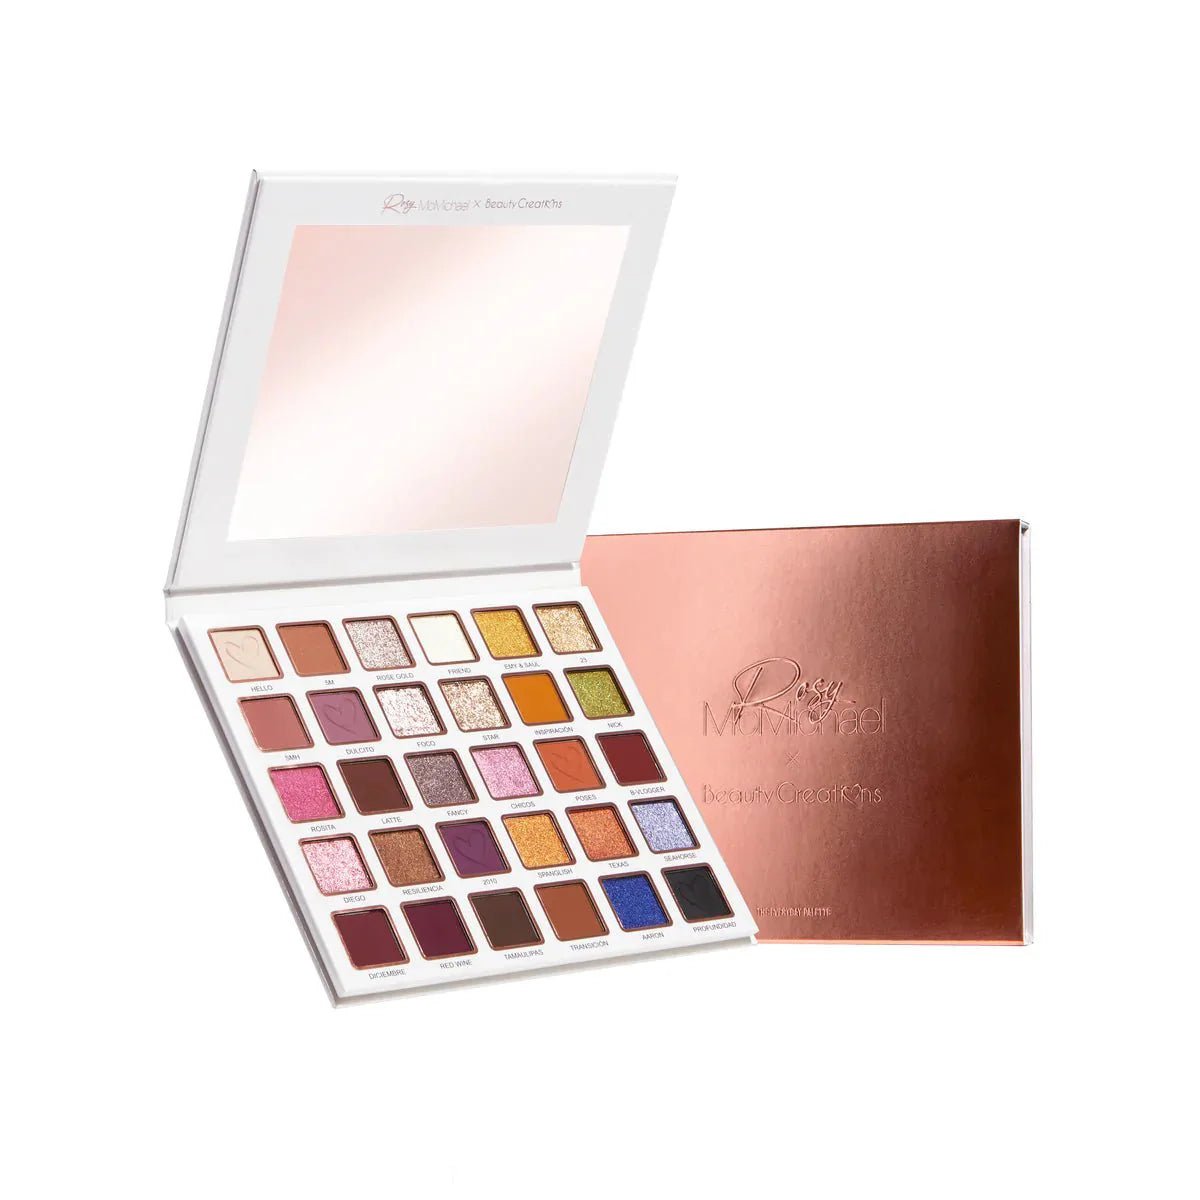 BCC Backup-Cosmetics-Beauty Creations - Paleta De Sombras The Every Day Palette - Rosy McMichael X Beauty Creations-RME30